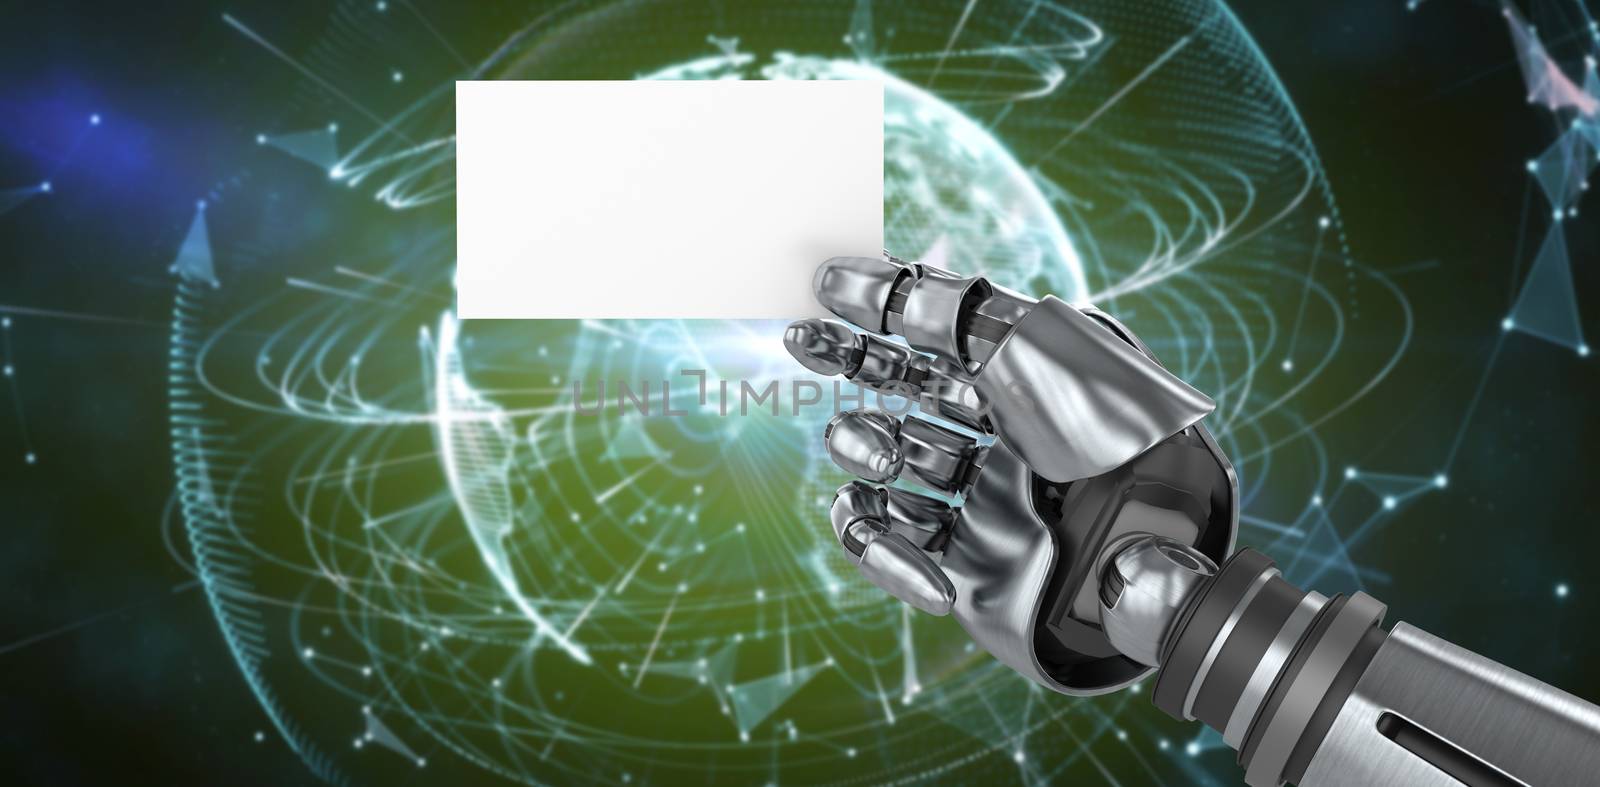 Computer graphic image of robotic arm holding placard against global technology background in blue